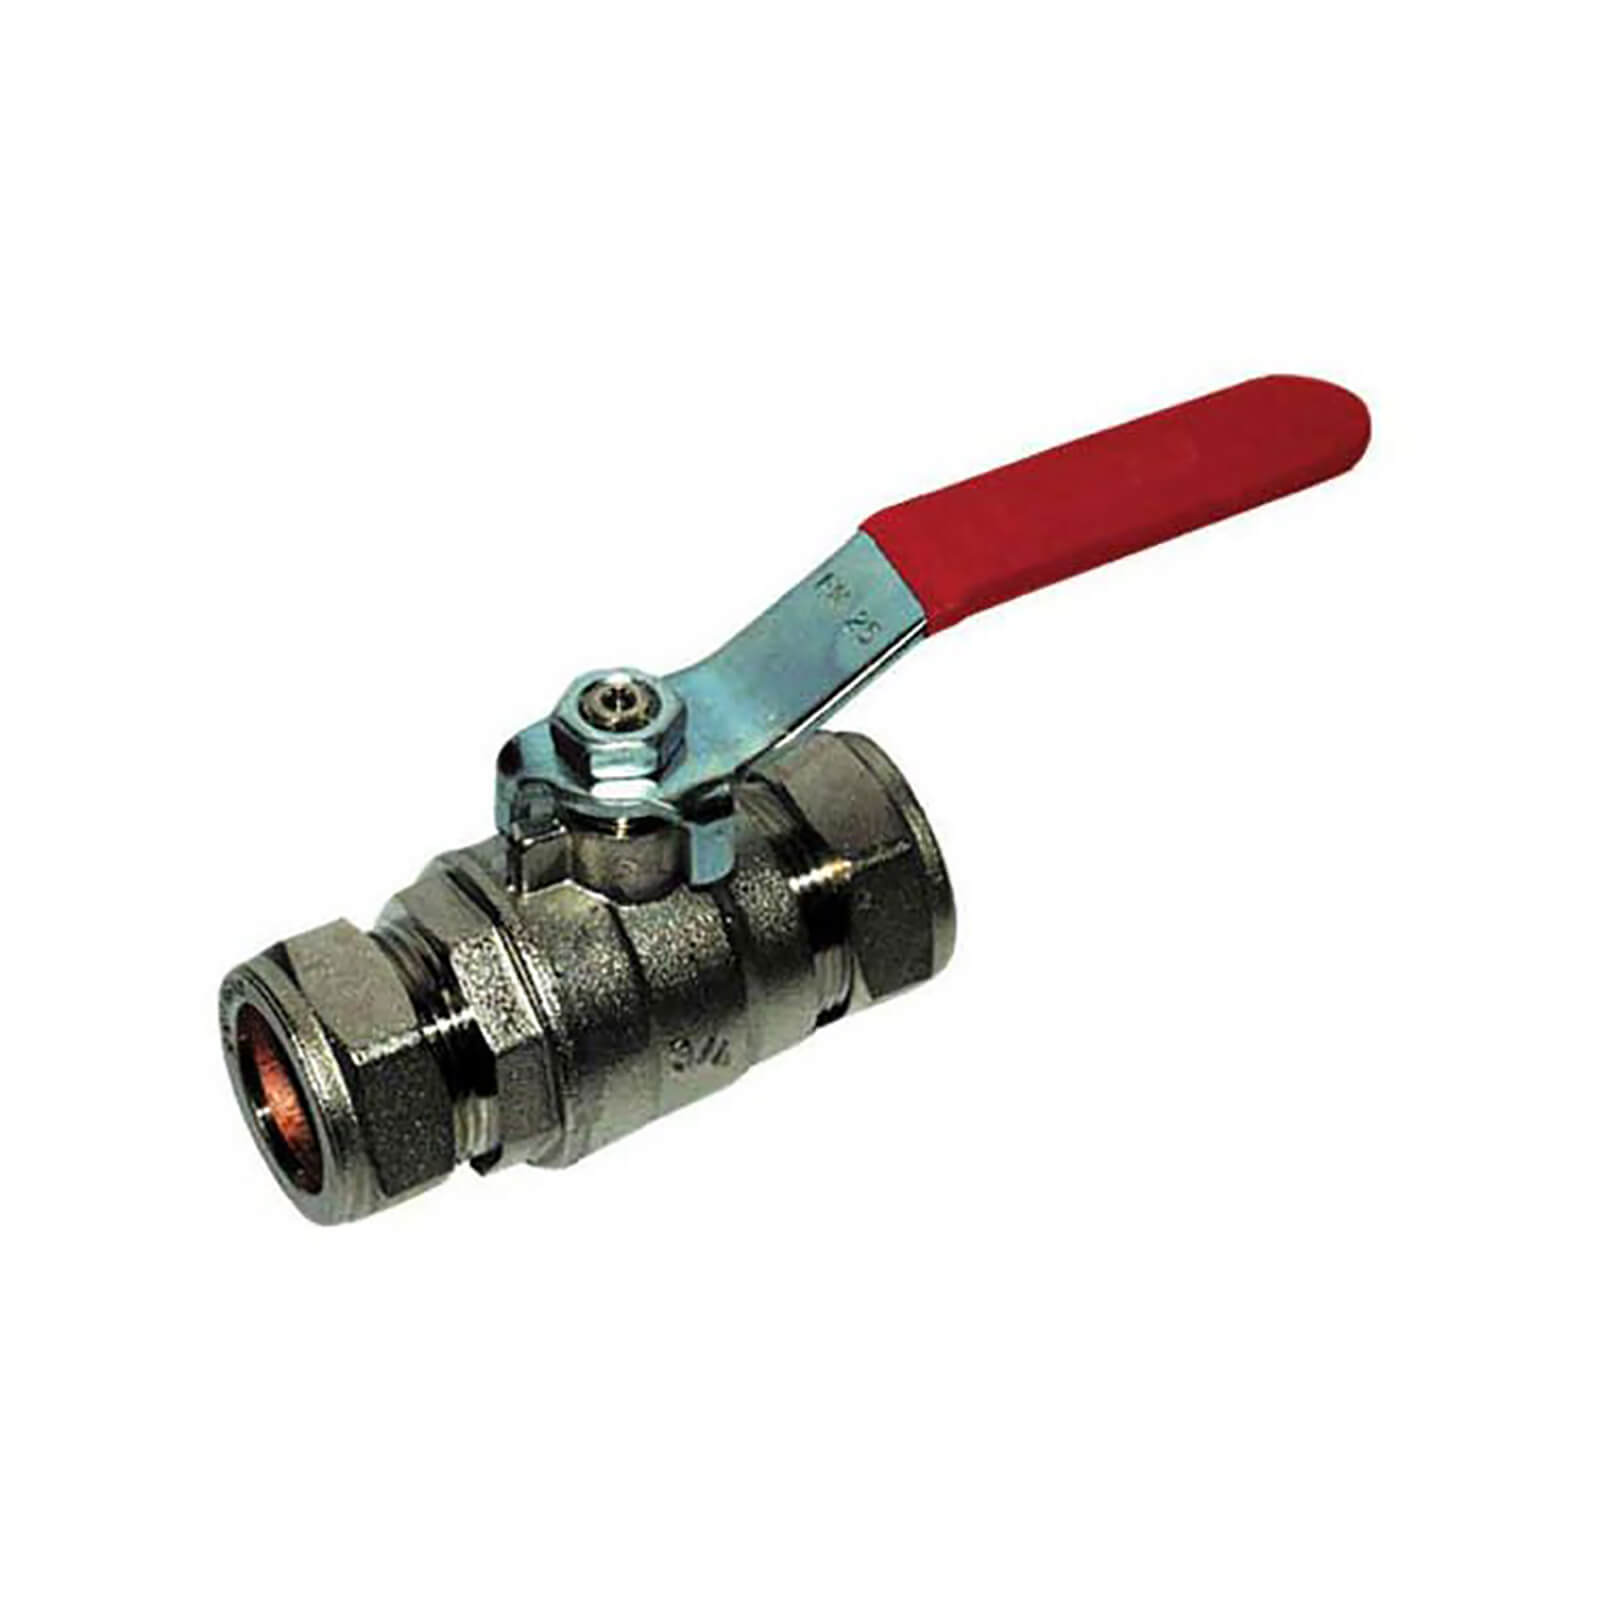 Isolation Ball Valve with On Off Handle Compression Fitting - 15mm